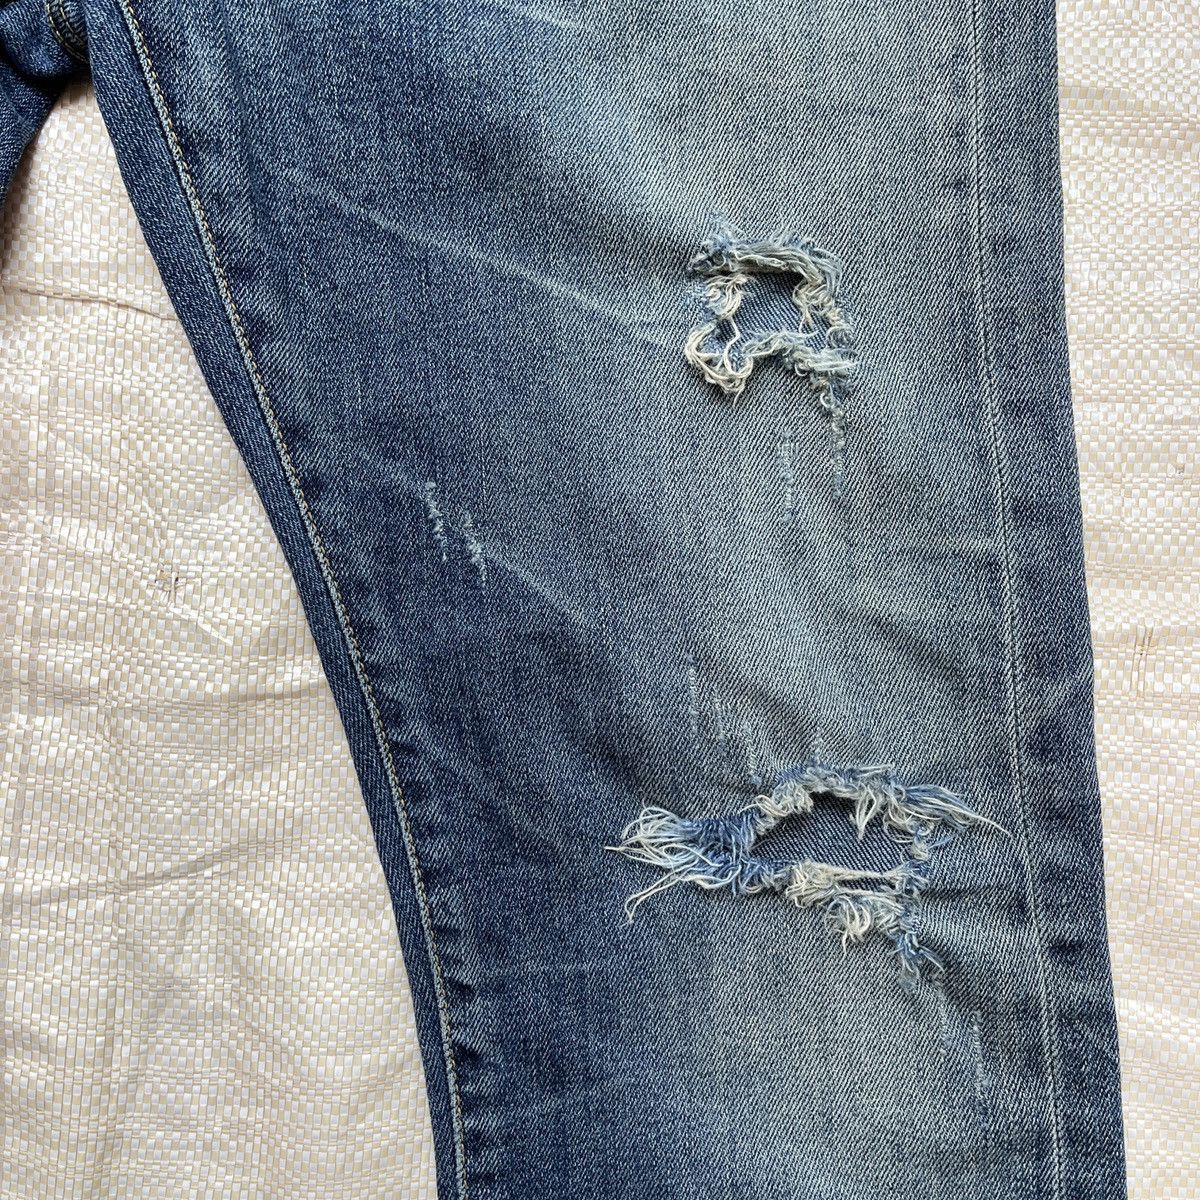 Distressed Denim - Ripped Black Label Denim Jeans With Patches At Pocket - 13